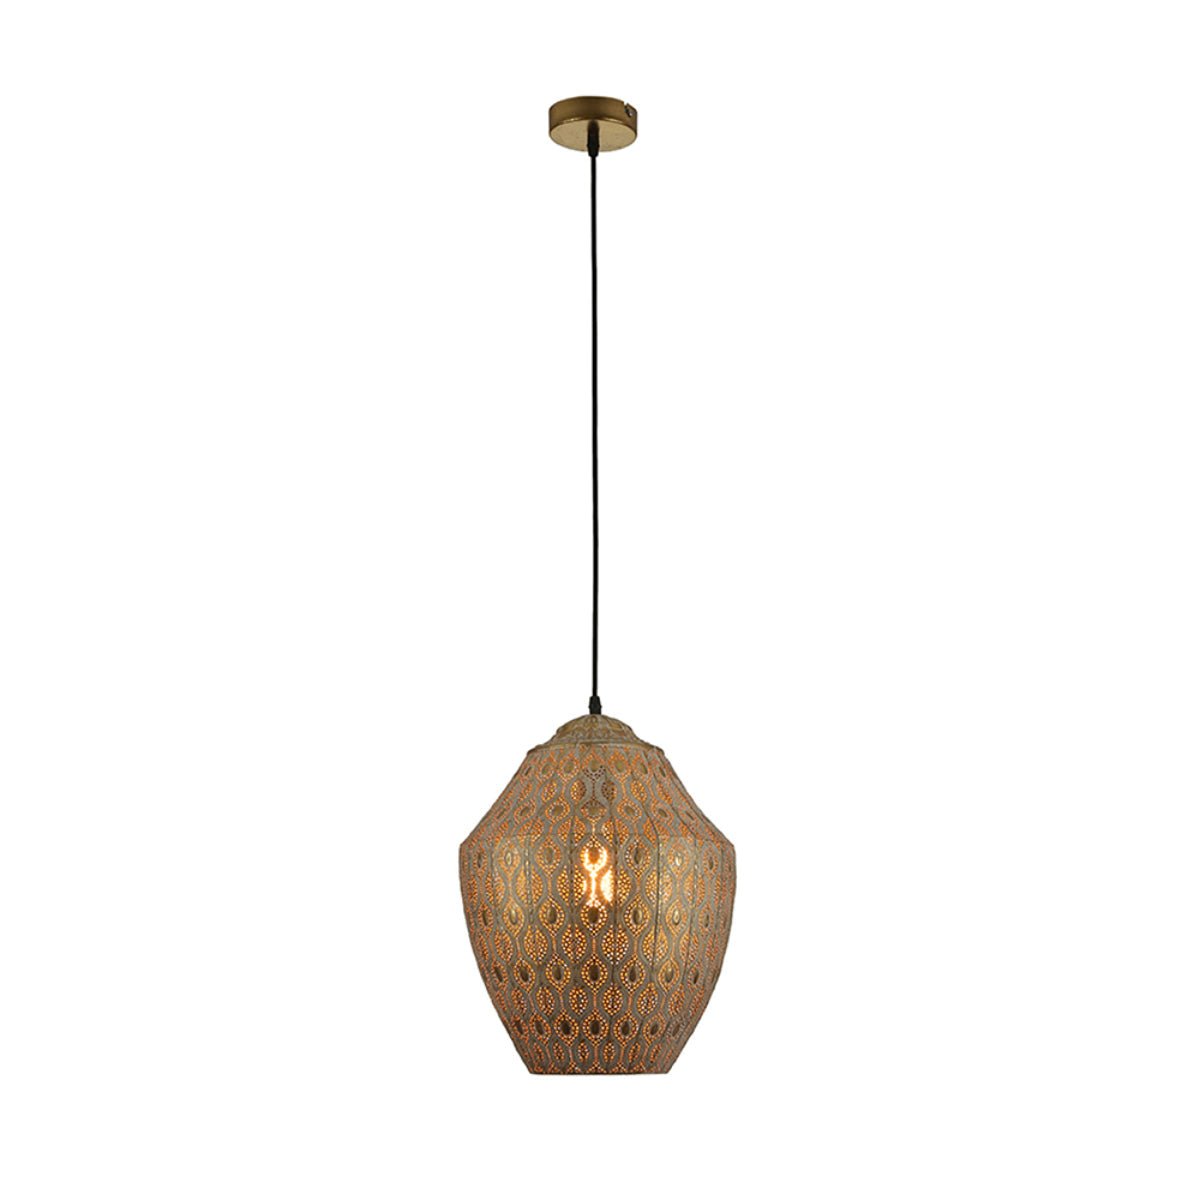 Main image of Antique Brass Metal Step Pendant Ceiling Light with E27 | TEKLED 150-18053